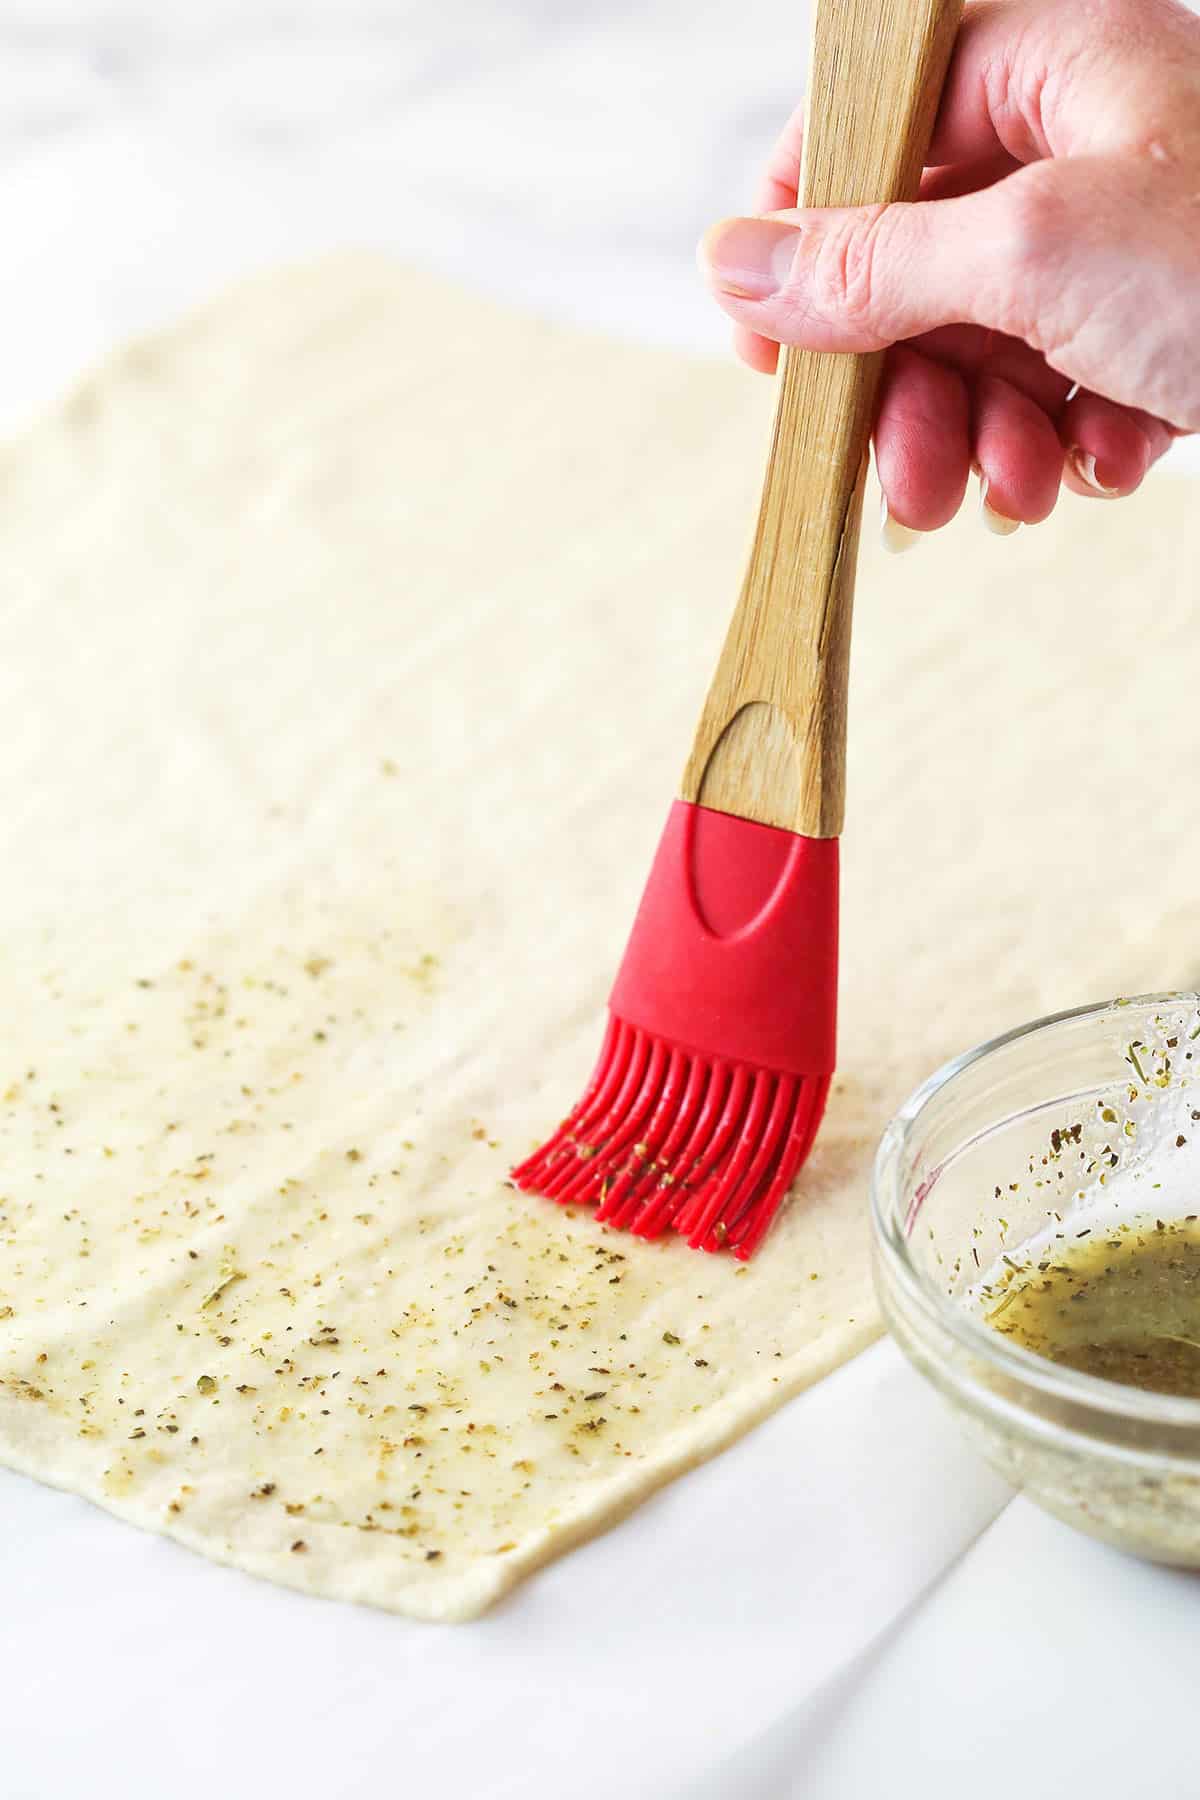 Brushing pizza dough with seasoned butter.